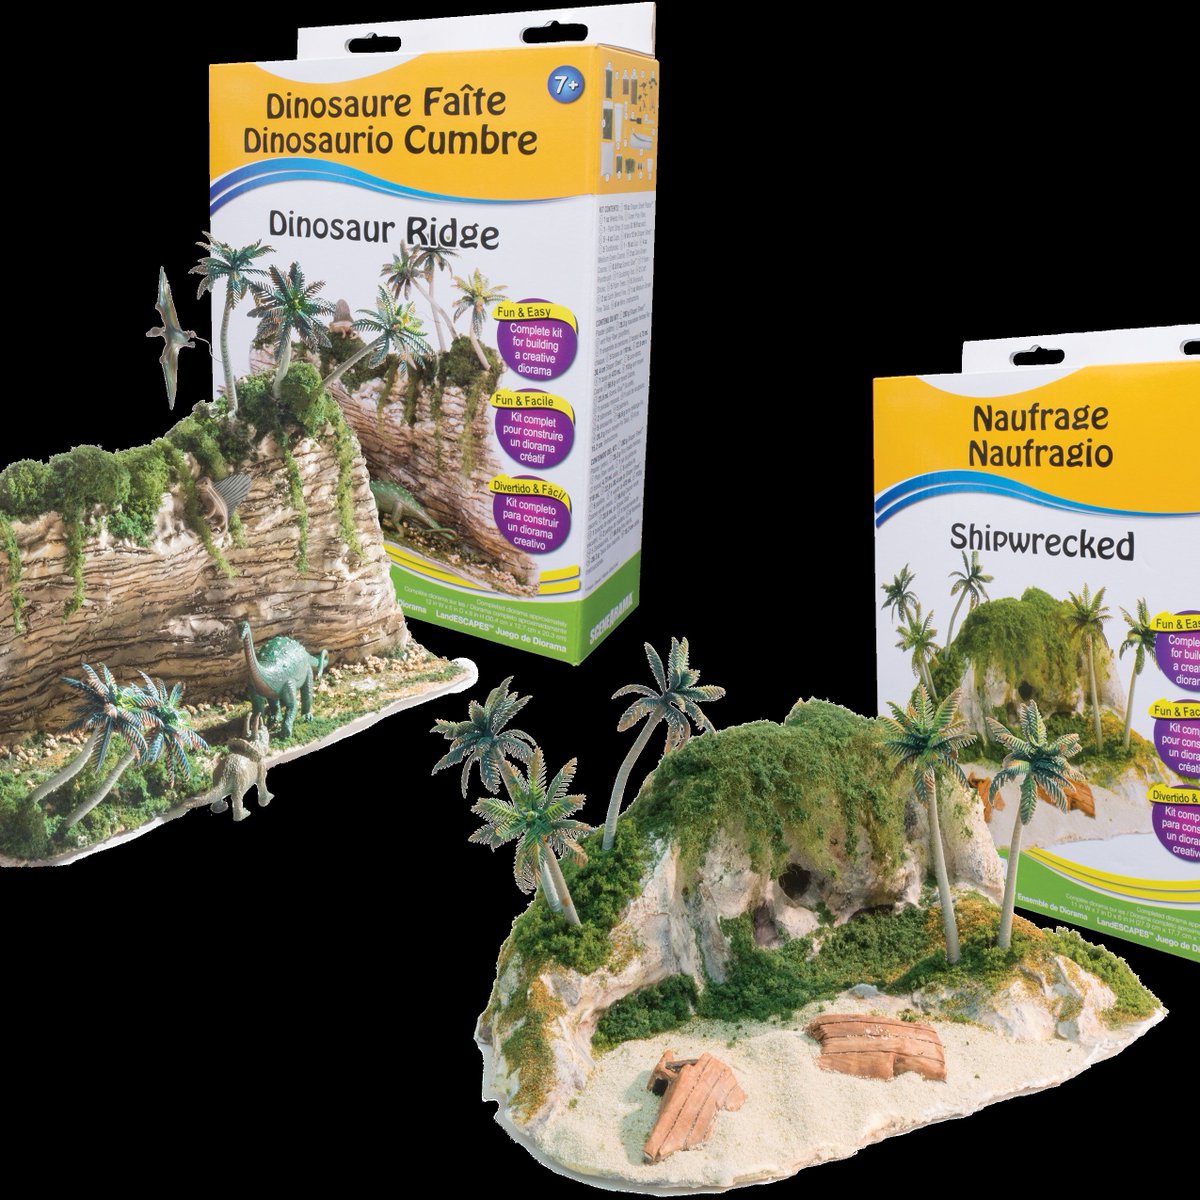 Our LandESCAPES™ Kits provide a fun, easy arts and crafts activity for the whole family. Whether they love dinosaurs or pirates, these kits have everything you’ll need to build an adventurous scene.

What kit would you like to see next?

#artsandcrafts #kidcrafts #playideas